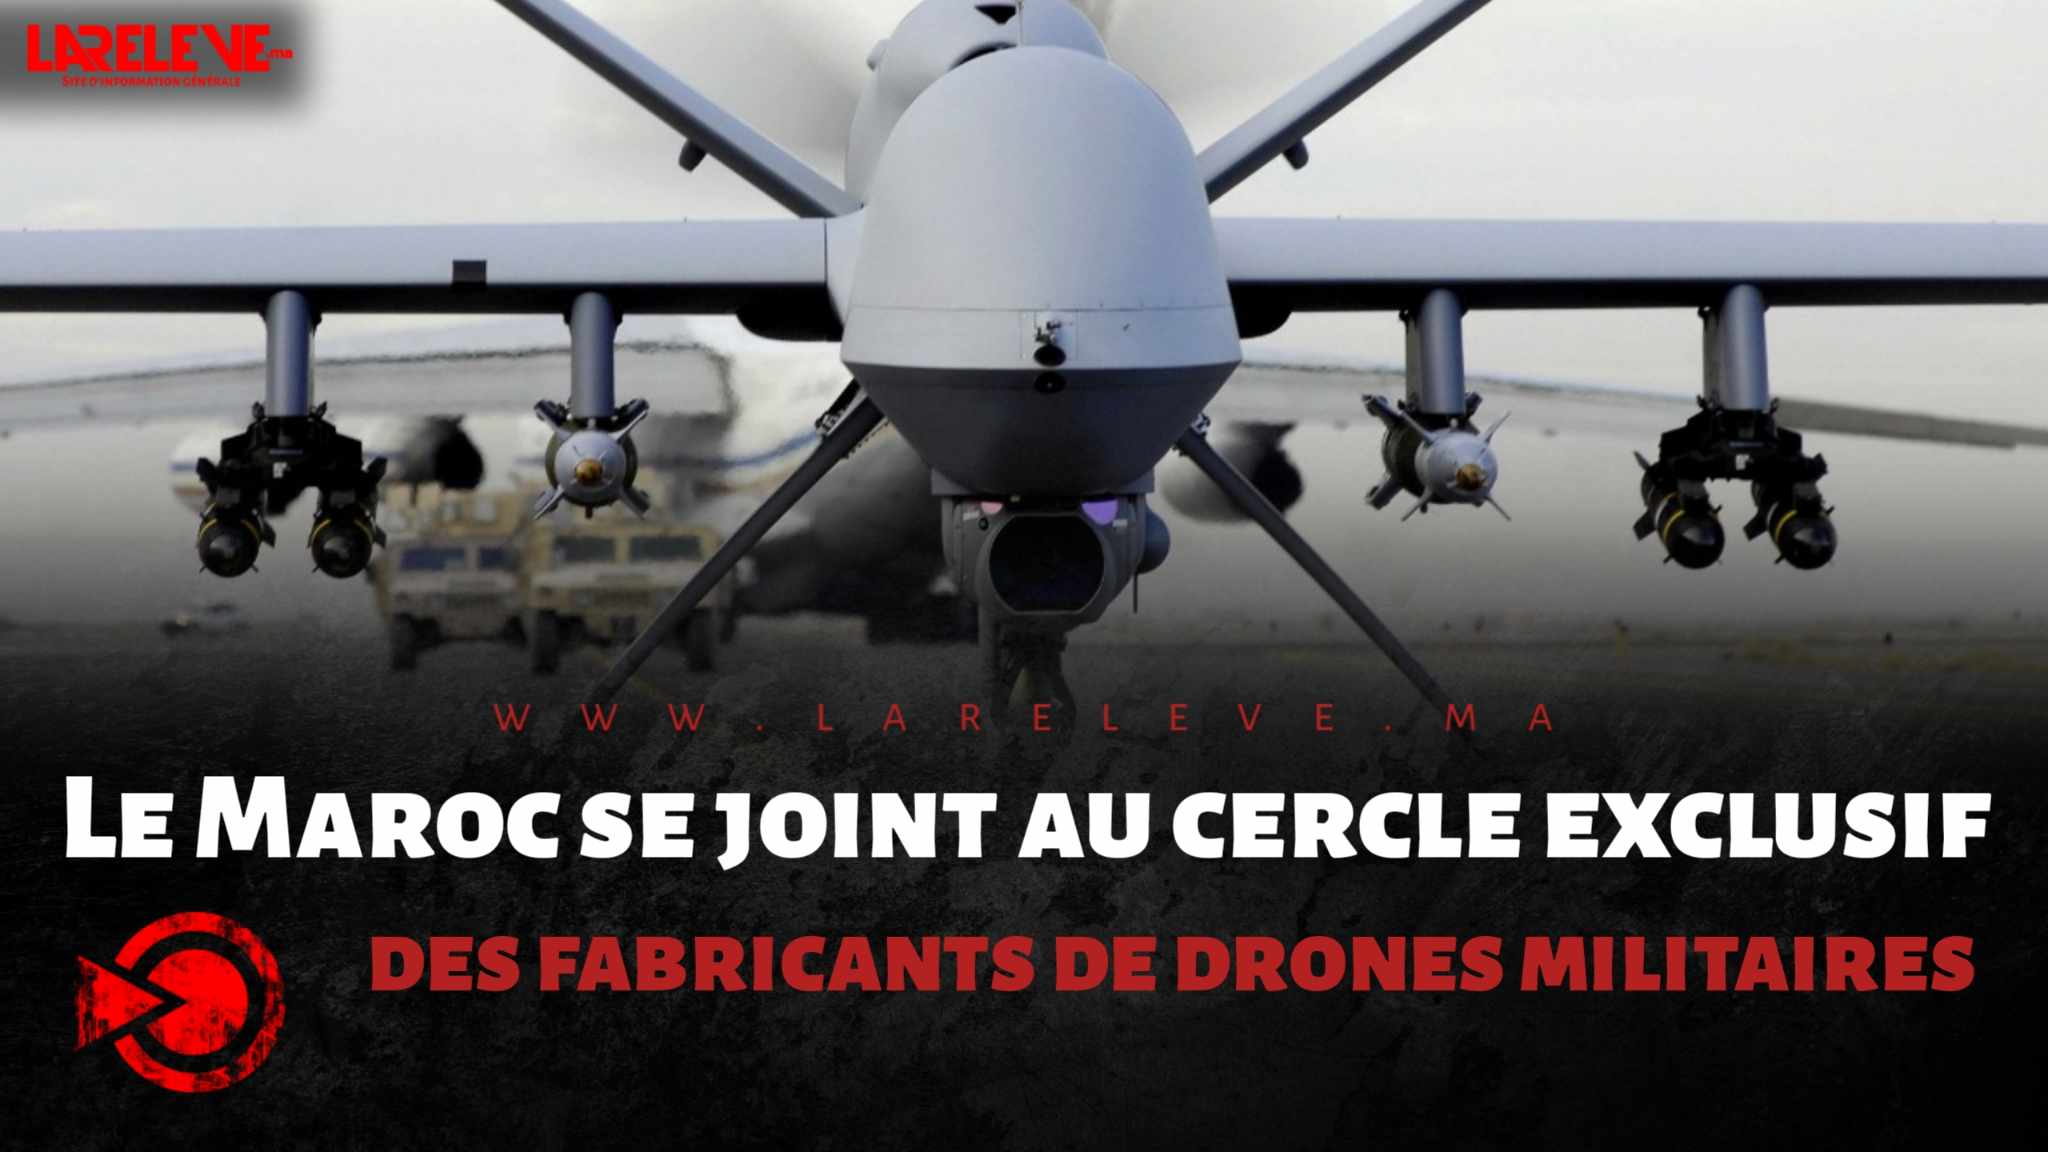 Morocco joins the exclusive circle of military drone manufacturers